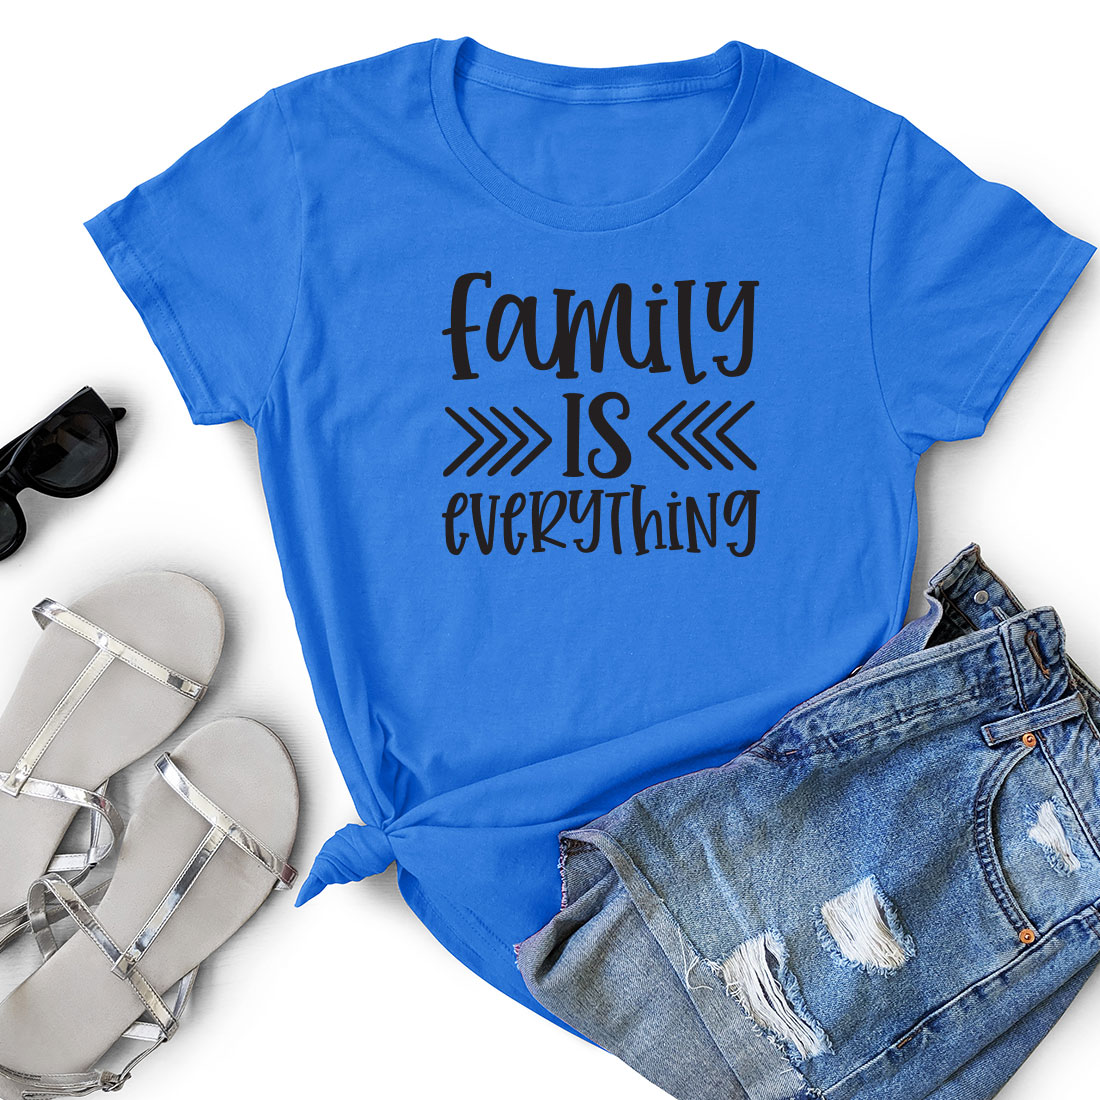 T - shirt that says family is everything next to a pair of shorts and.